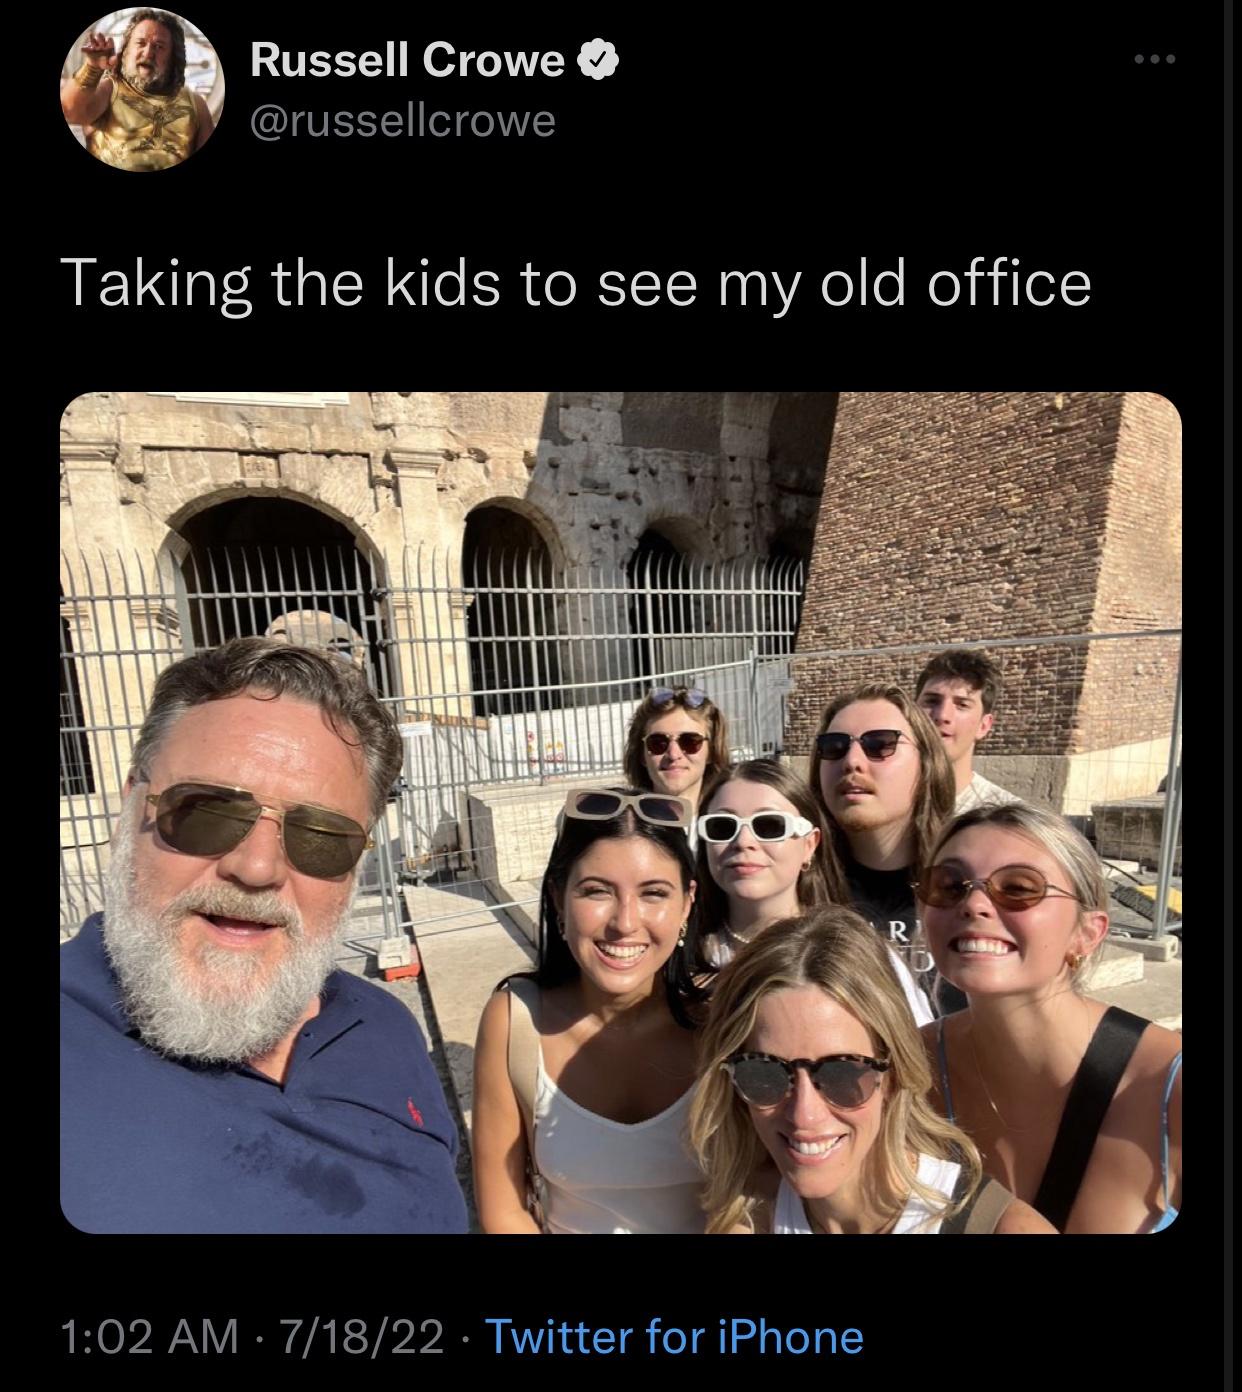 funny and savage tweets - Gladiator - Russell Crowe Taking the kids to see my old office 71822 Twitter for iPhone R